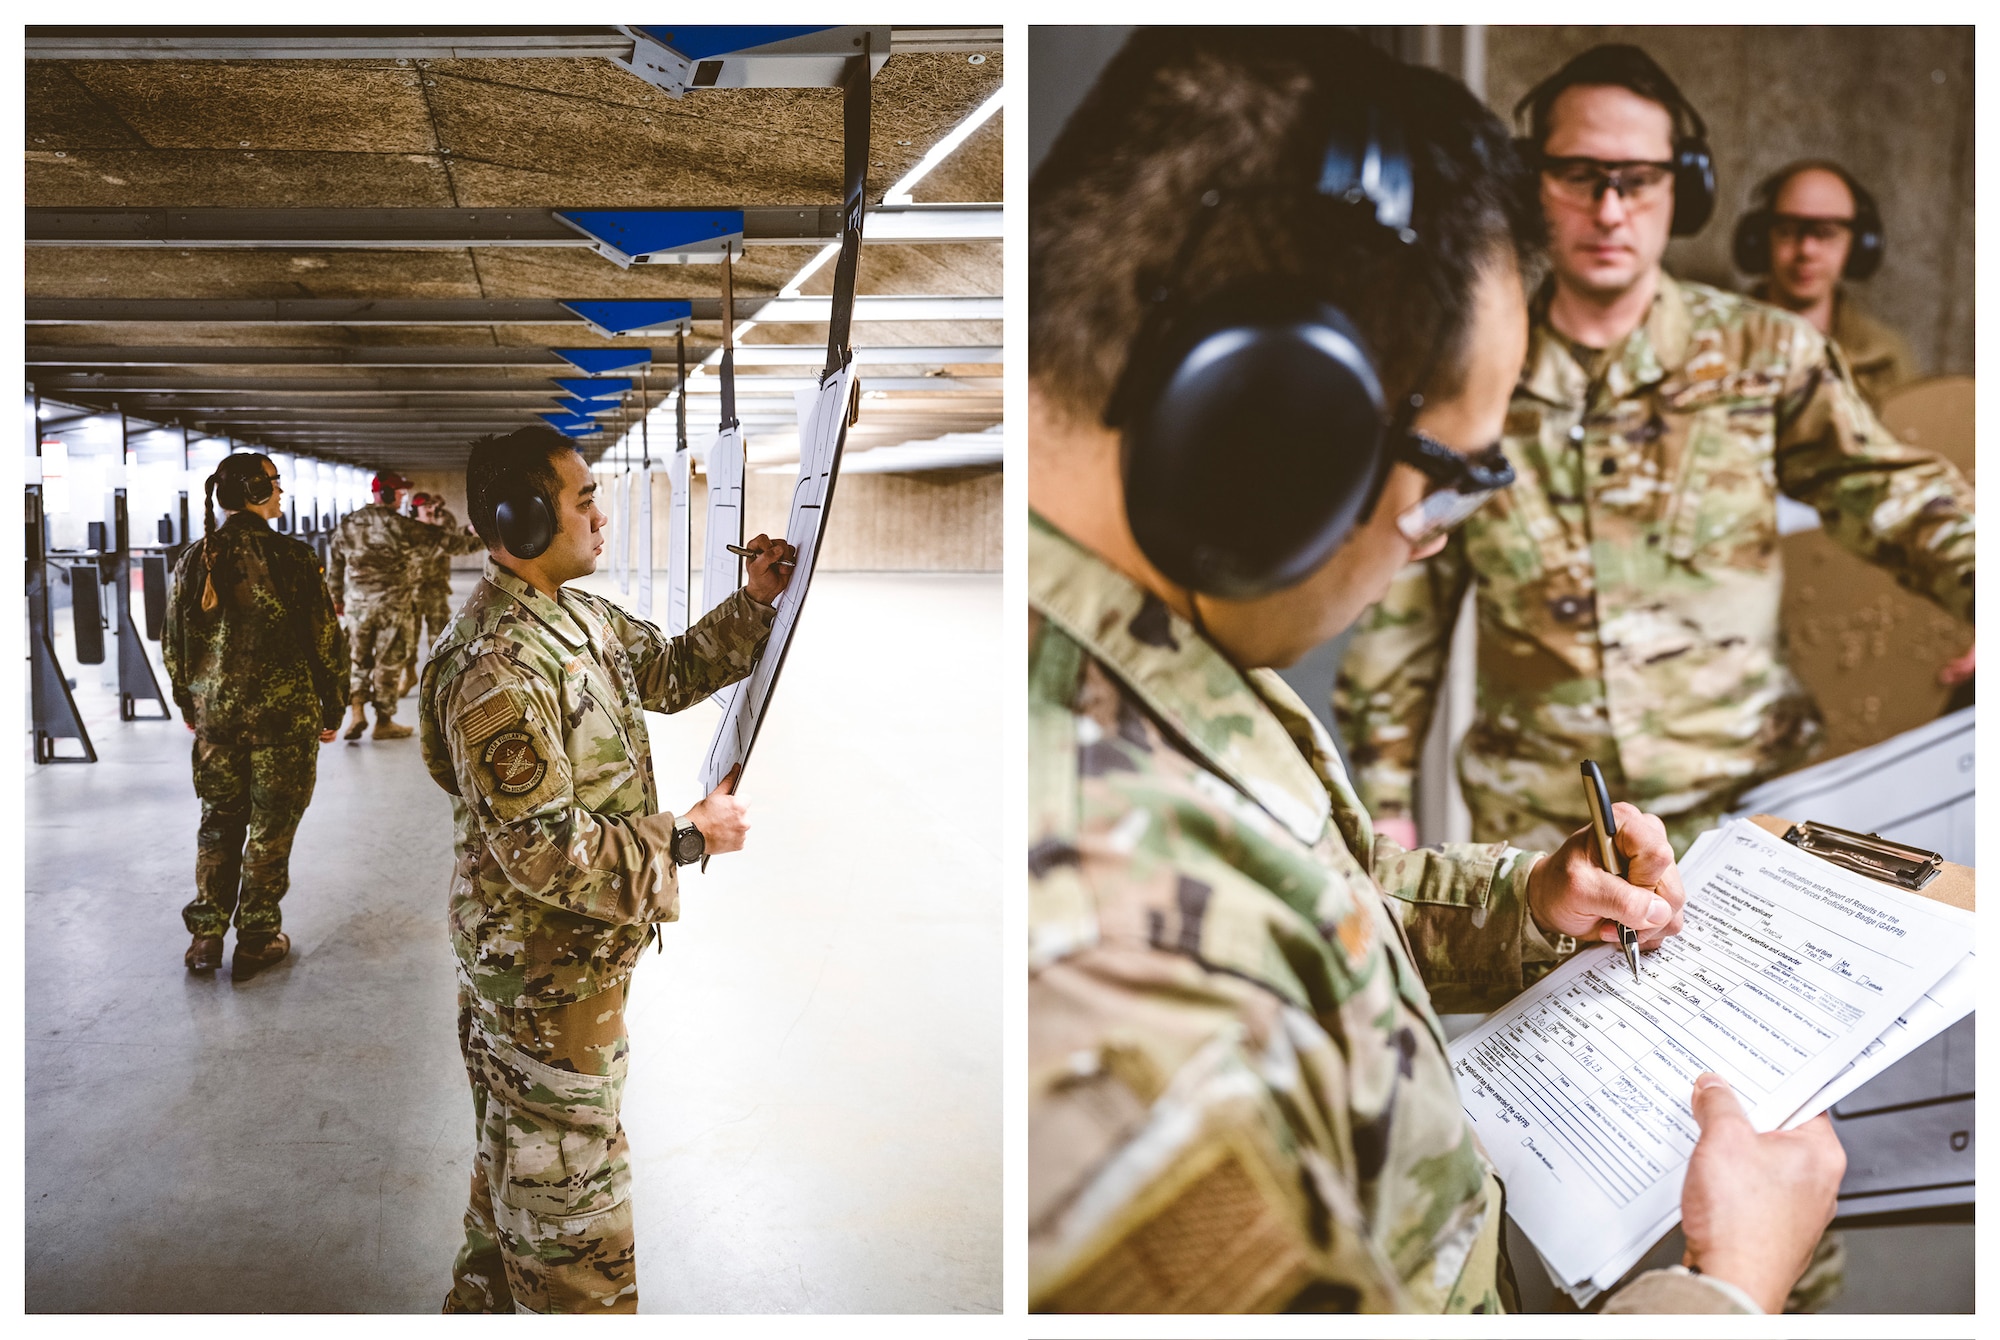 (Left) Master Sgt. Joseph McDowell, 88th Security Forces Squadron NCO in charge of operations, judges a target sheet Feb. 2 during German Armed Forces Proficiency Badge testing at the unit’s firing range on Wright-Patterson Air Force Base, Ohio. (Right) Master Sgt. Joseph McDowell, 88th Security Forces Squadron NCO in charge of operations, records an Airman’s shooting score Feb. 2 during German Armed Forces Proficiency Badge testing at the unit’s firing range on Wright-Patterson Air Force Base, Ohio.